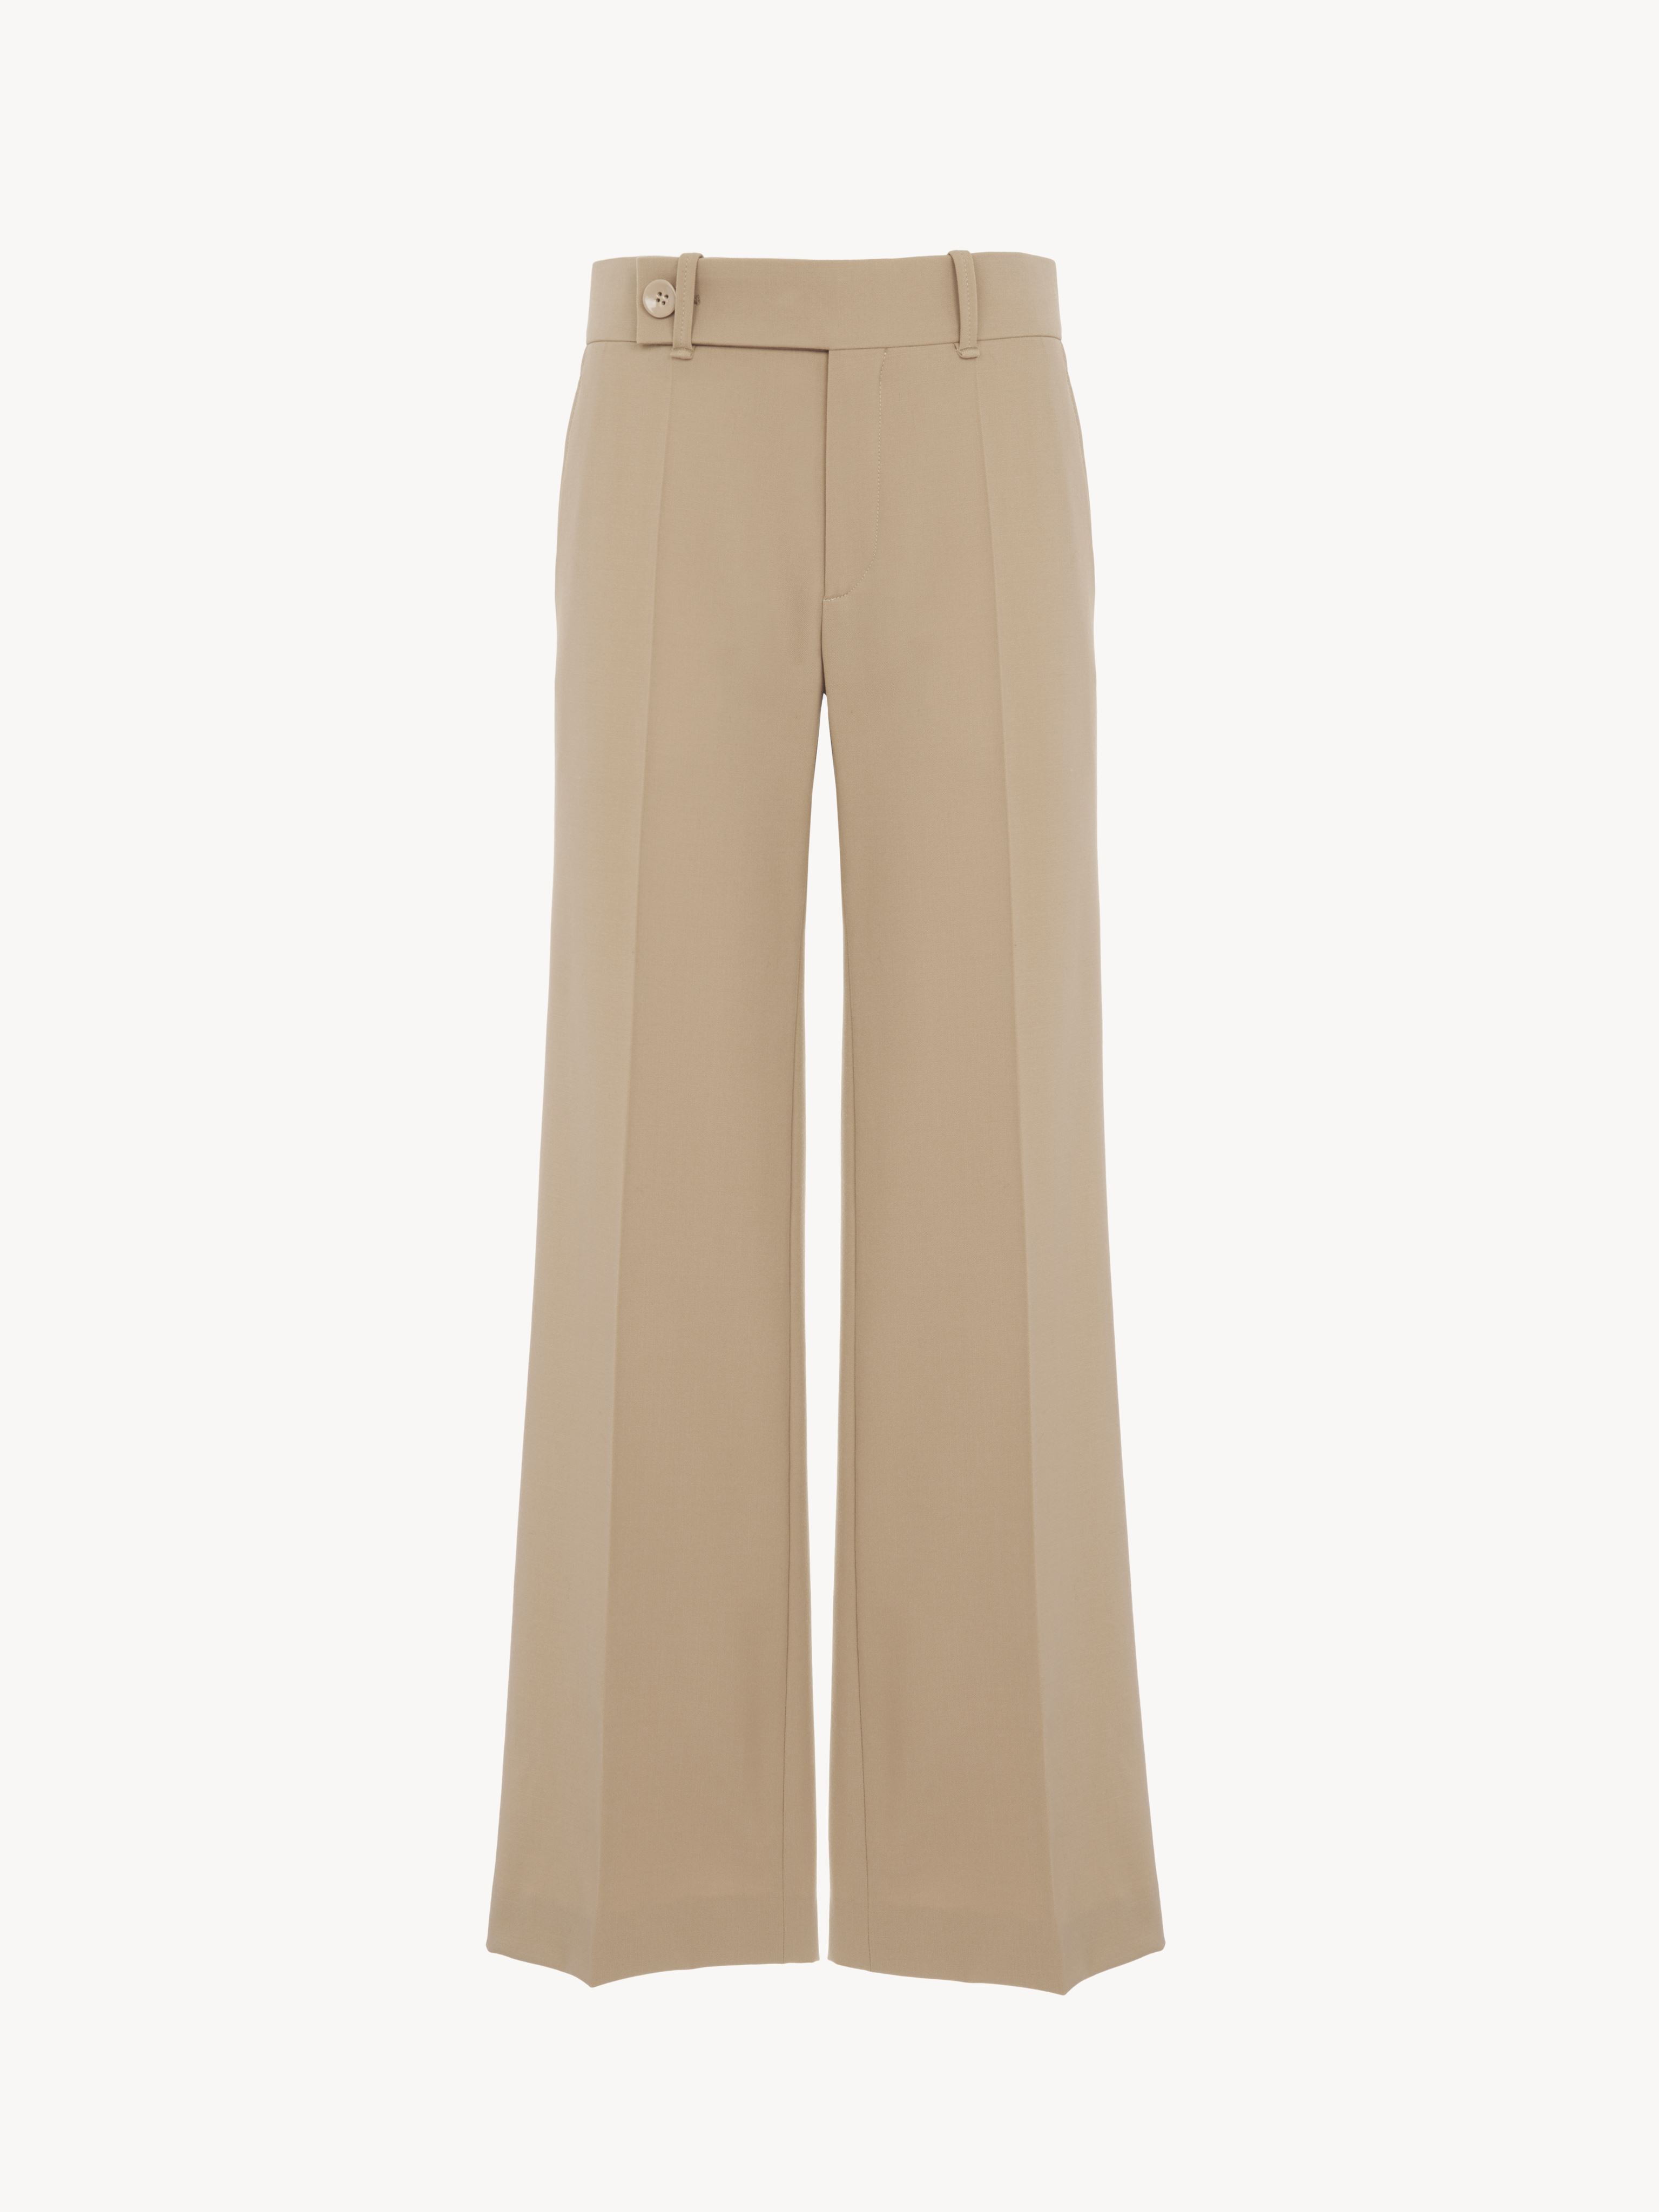 Chloé Beige Straight Tailored Pants